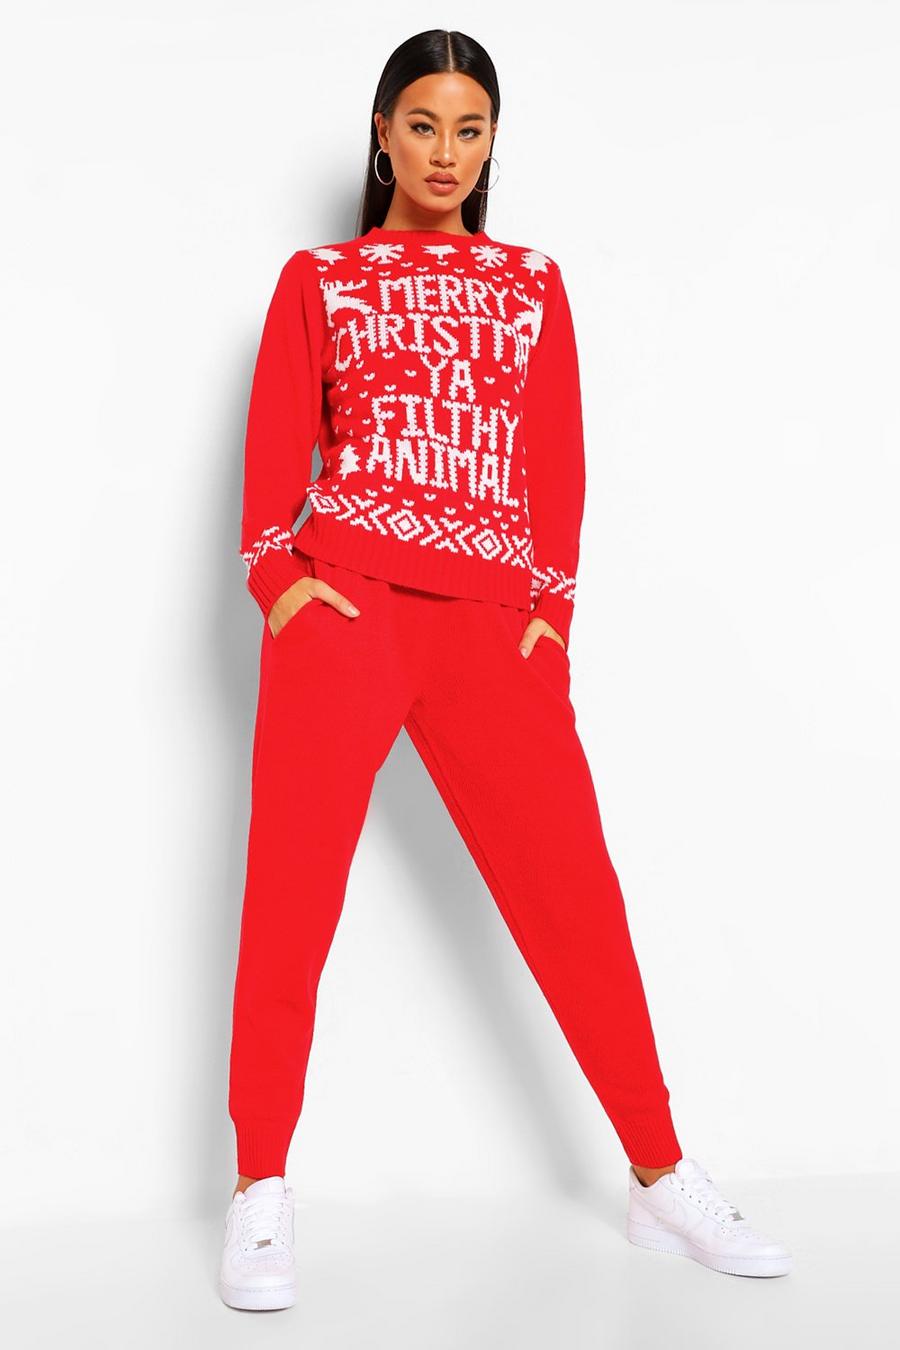 Ya Filthy Animal Weihnachts Co-Ord, Red image number 1